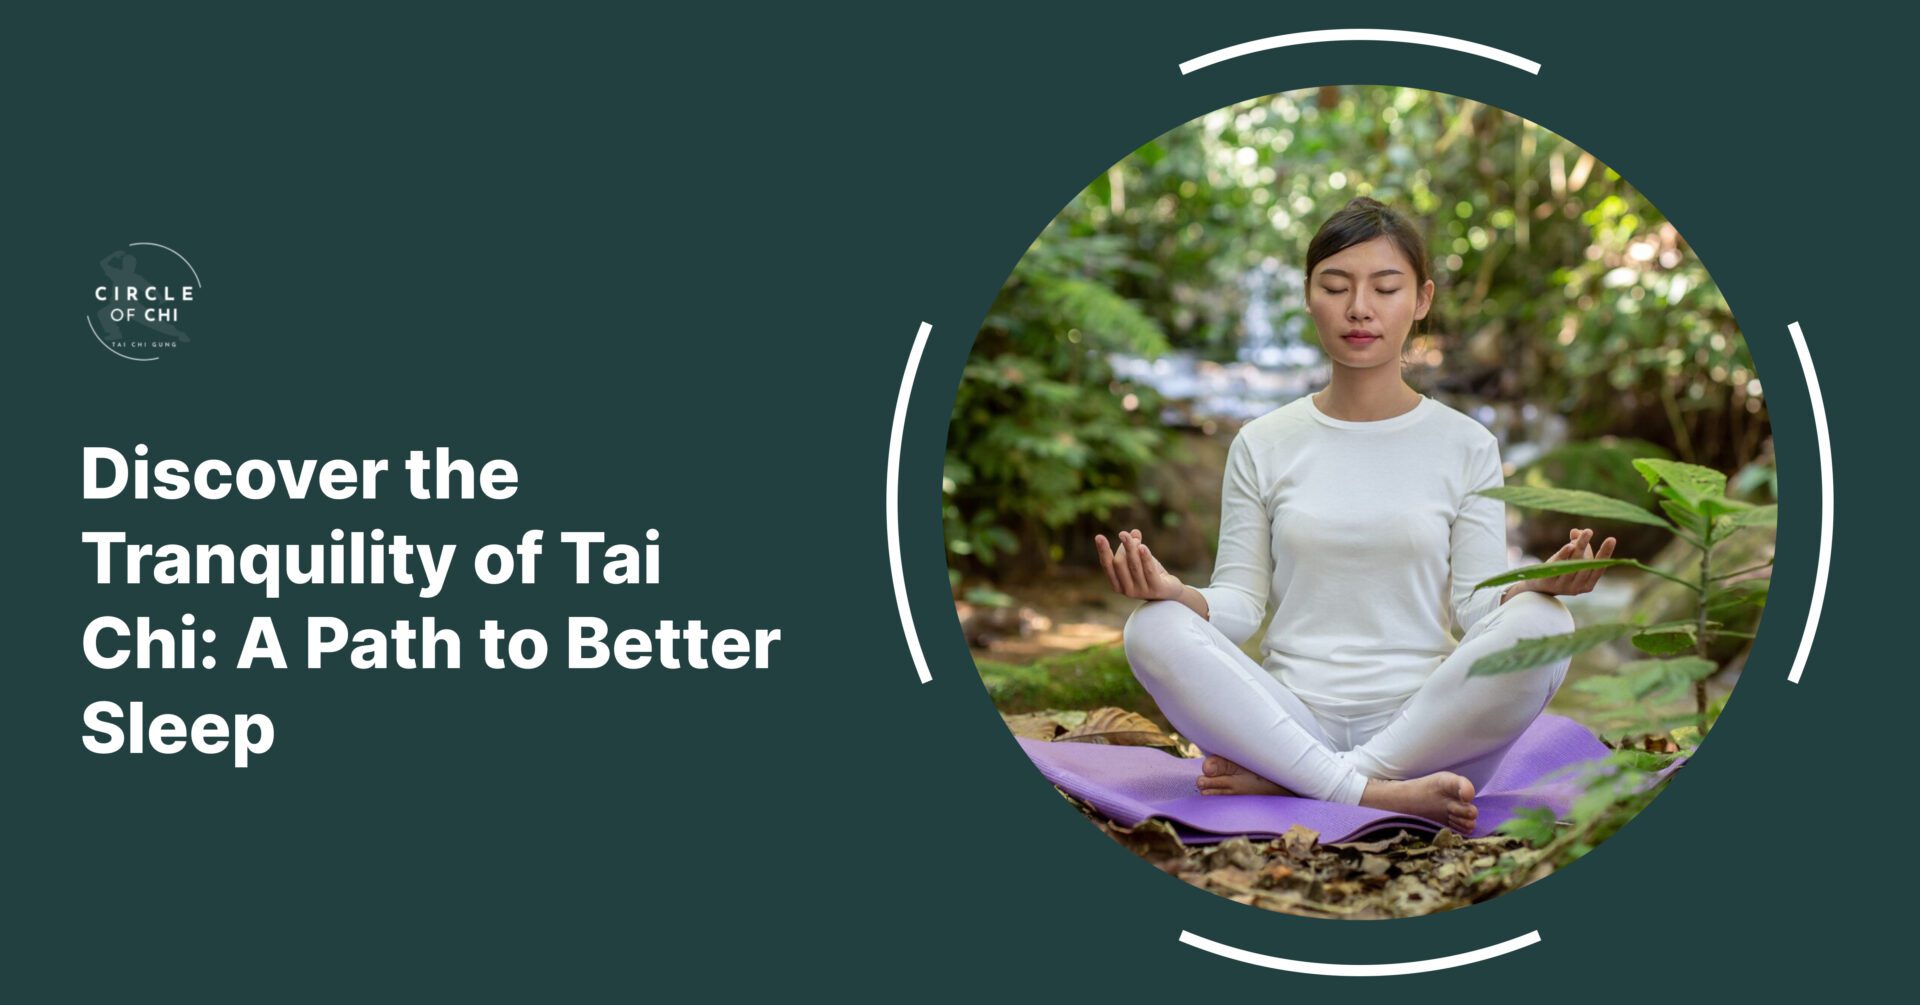 Discover the Tranquility of Tai Chi: A Path to Better Sleep